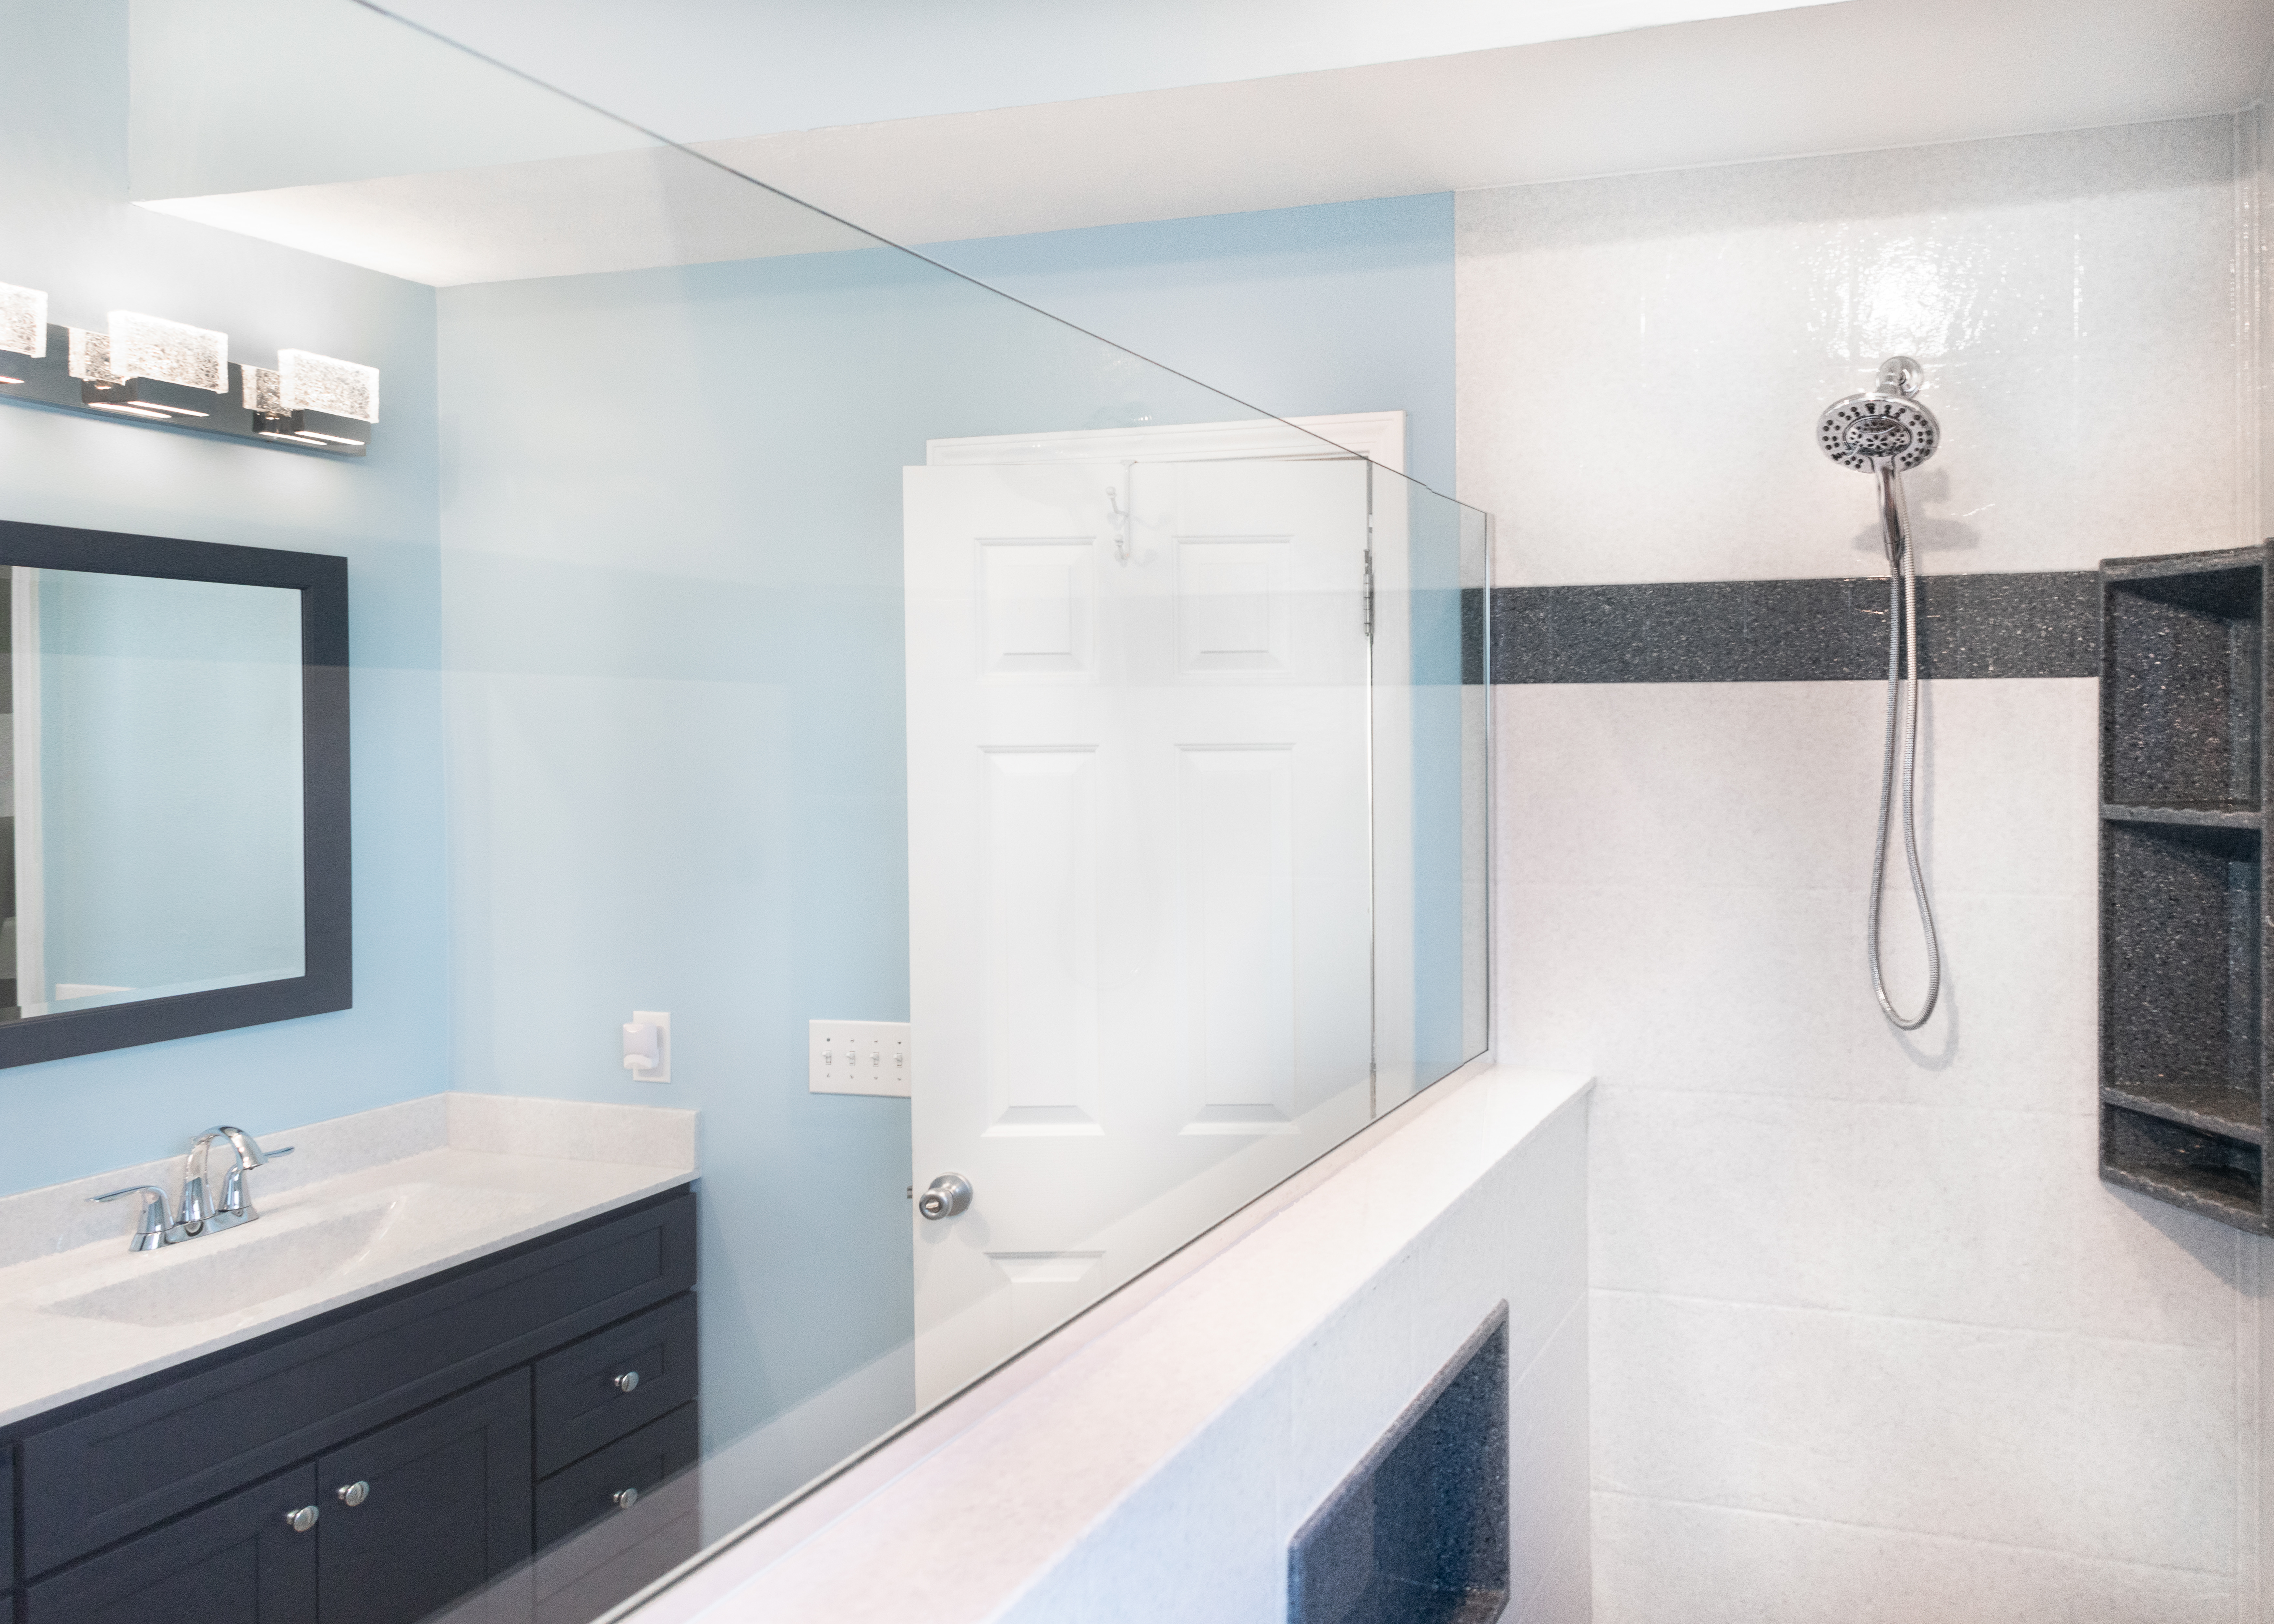 Bathroom Remodeling Services near Brownsburg, IN